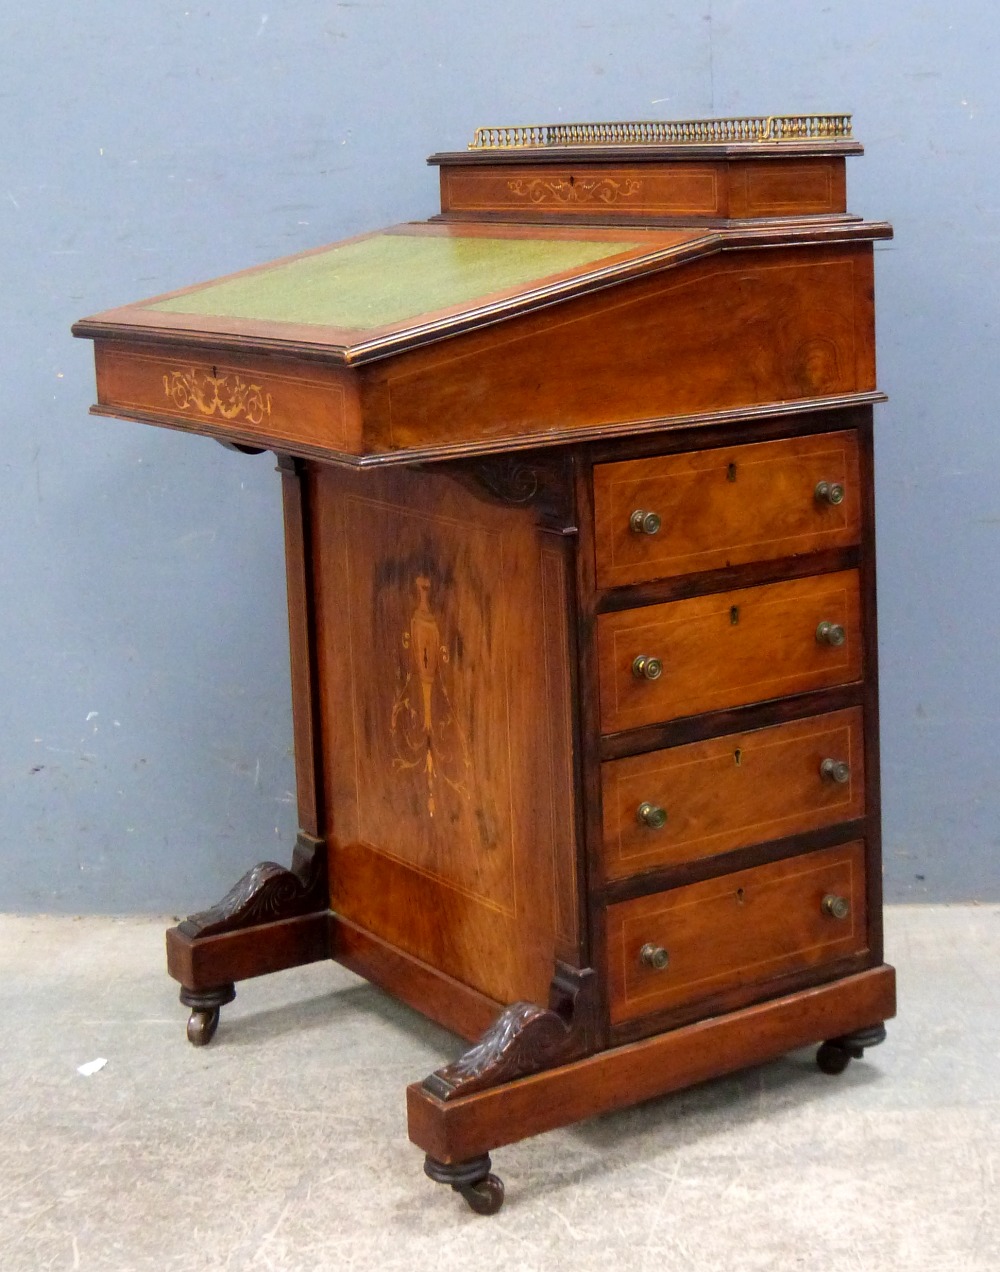 Victorian rosewood Davenport with marquetry inlaid decoration, raised back and four drawers on